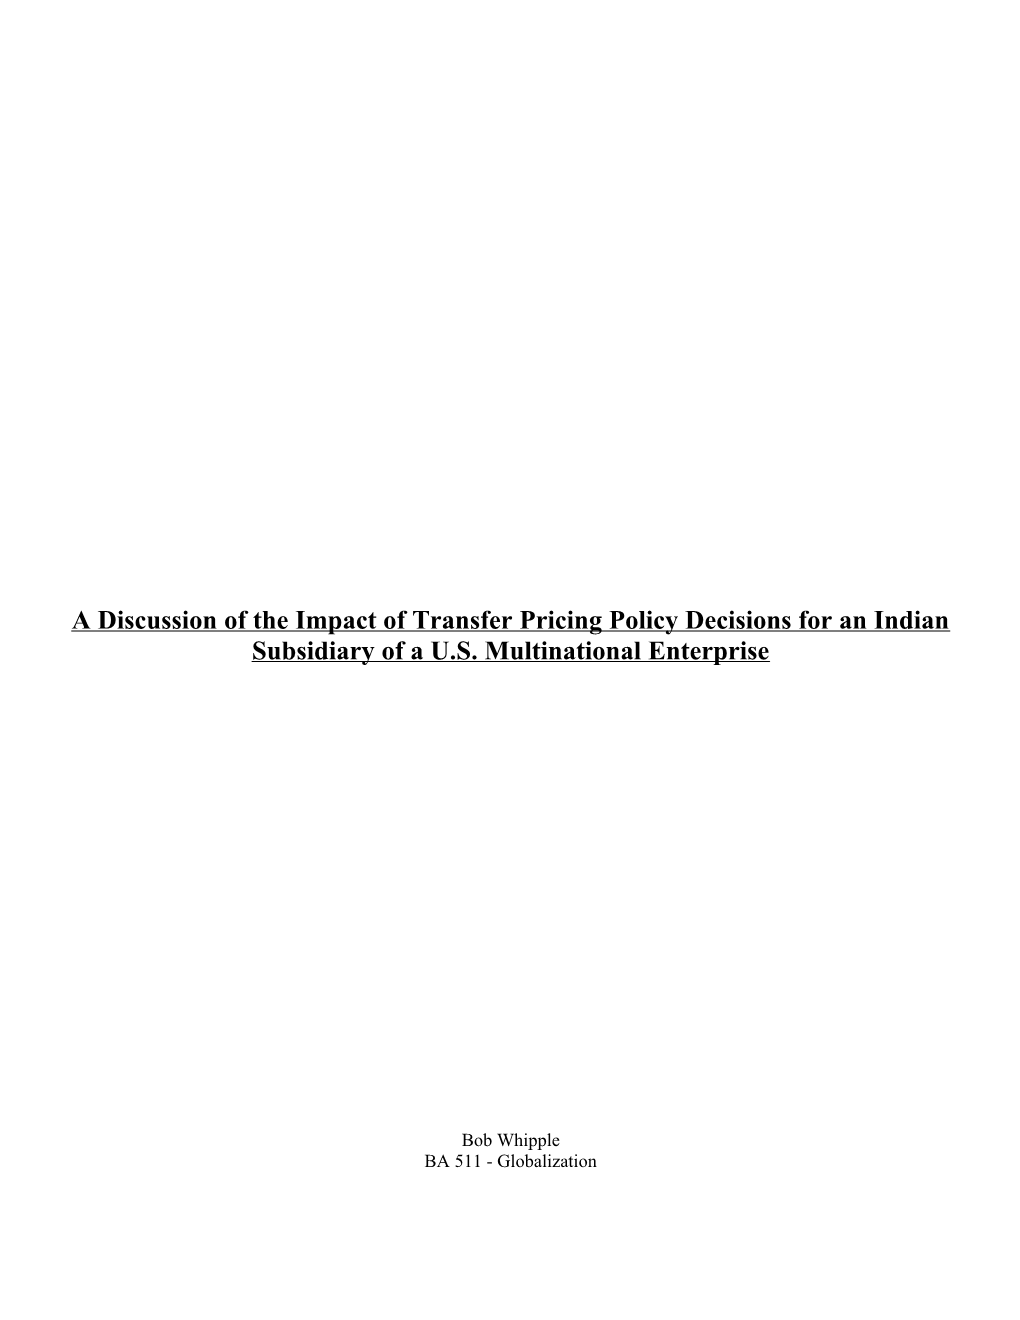 A Discussion of the Impact of Transfer Pricing Policy Decisions for an Indian Subsidiary